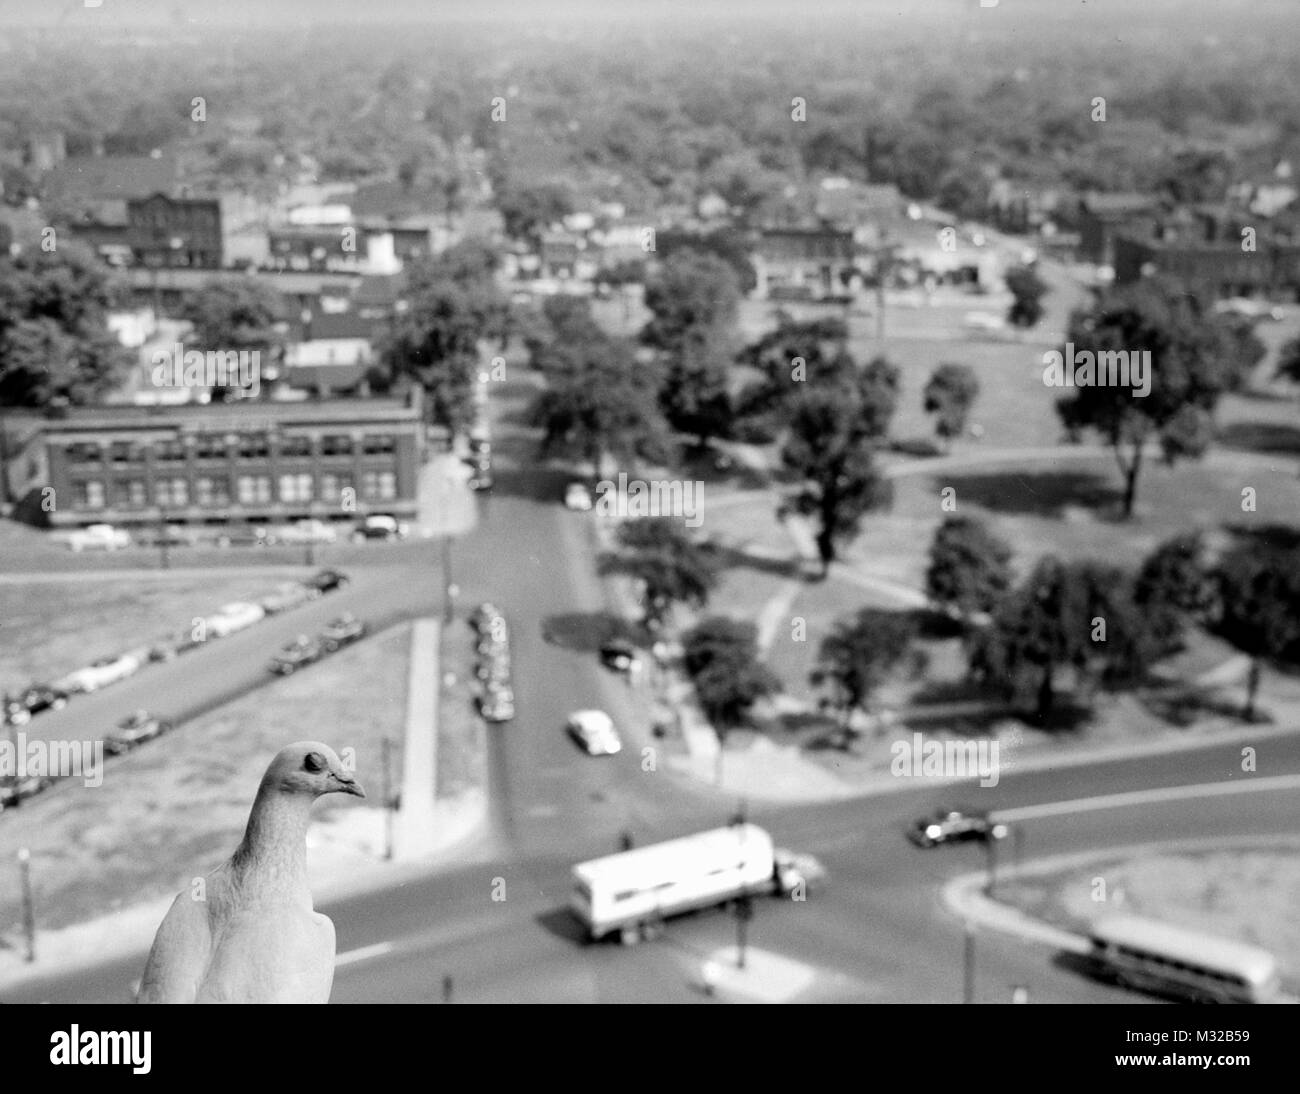 Pigeon has a bird's eye view of park, ca. 1948. Stock Photo